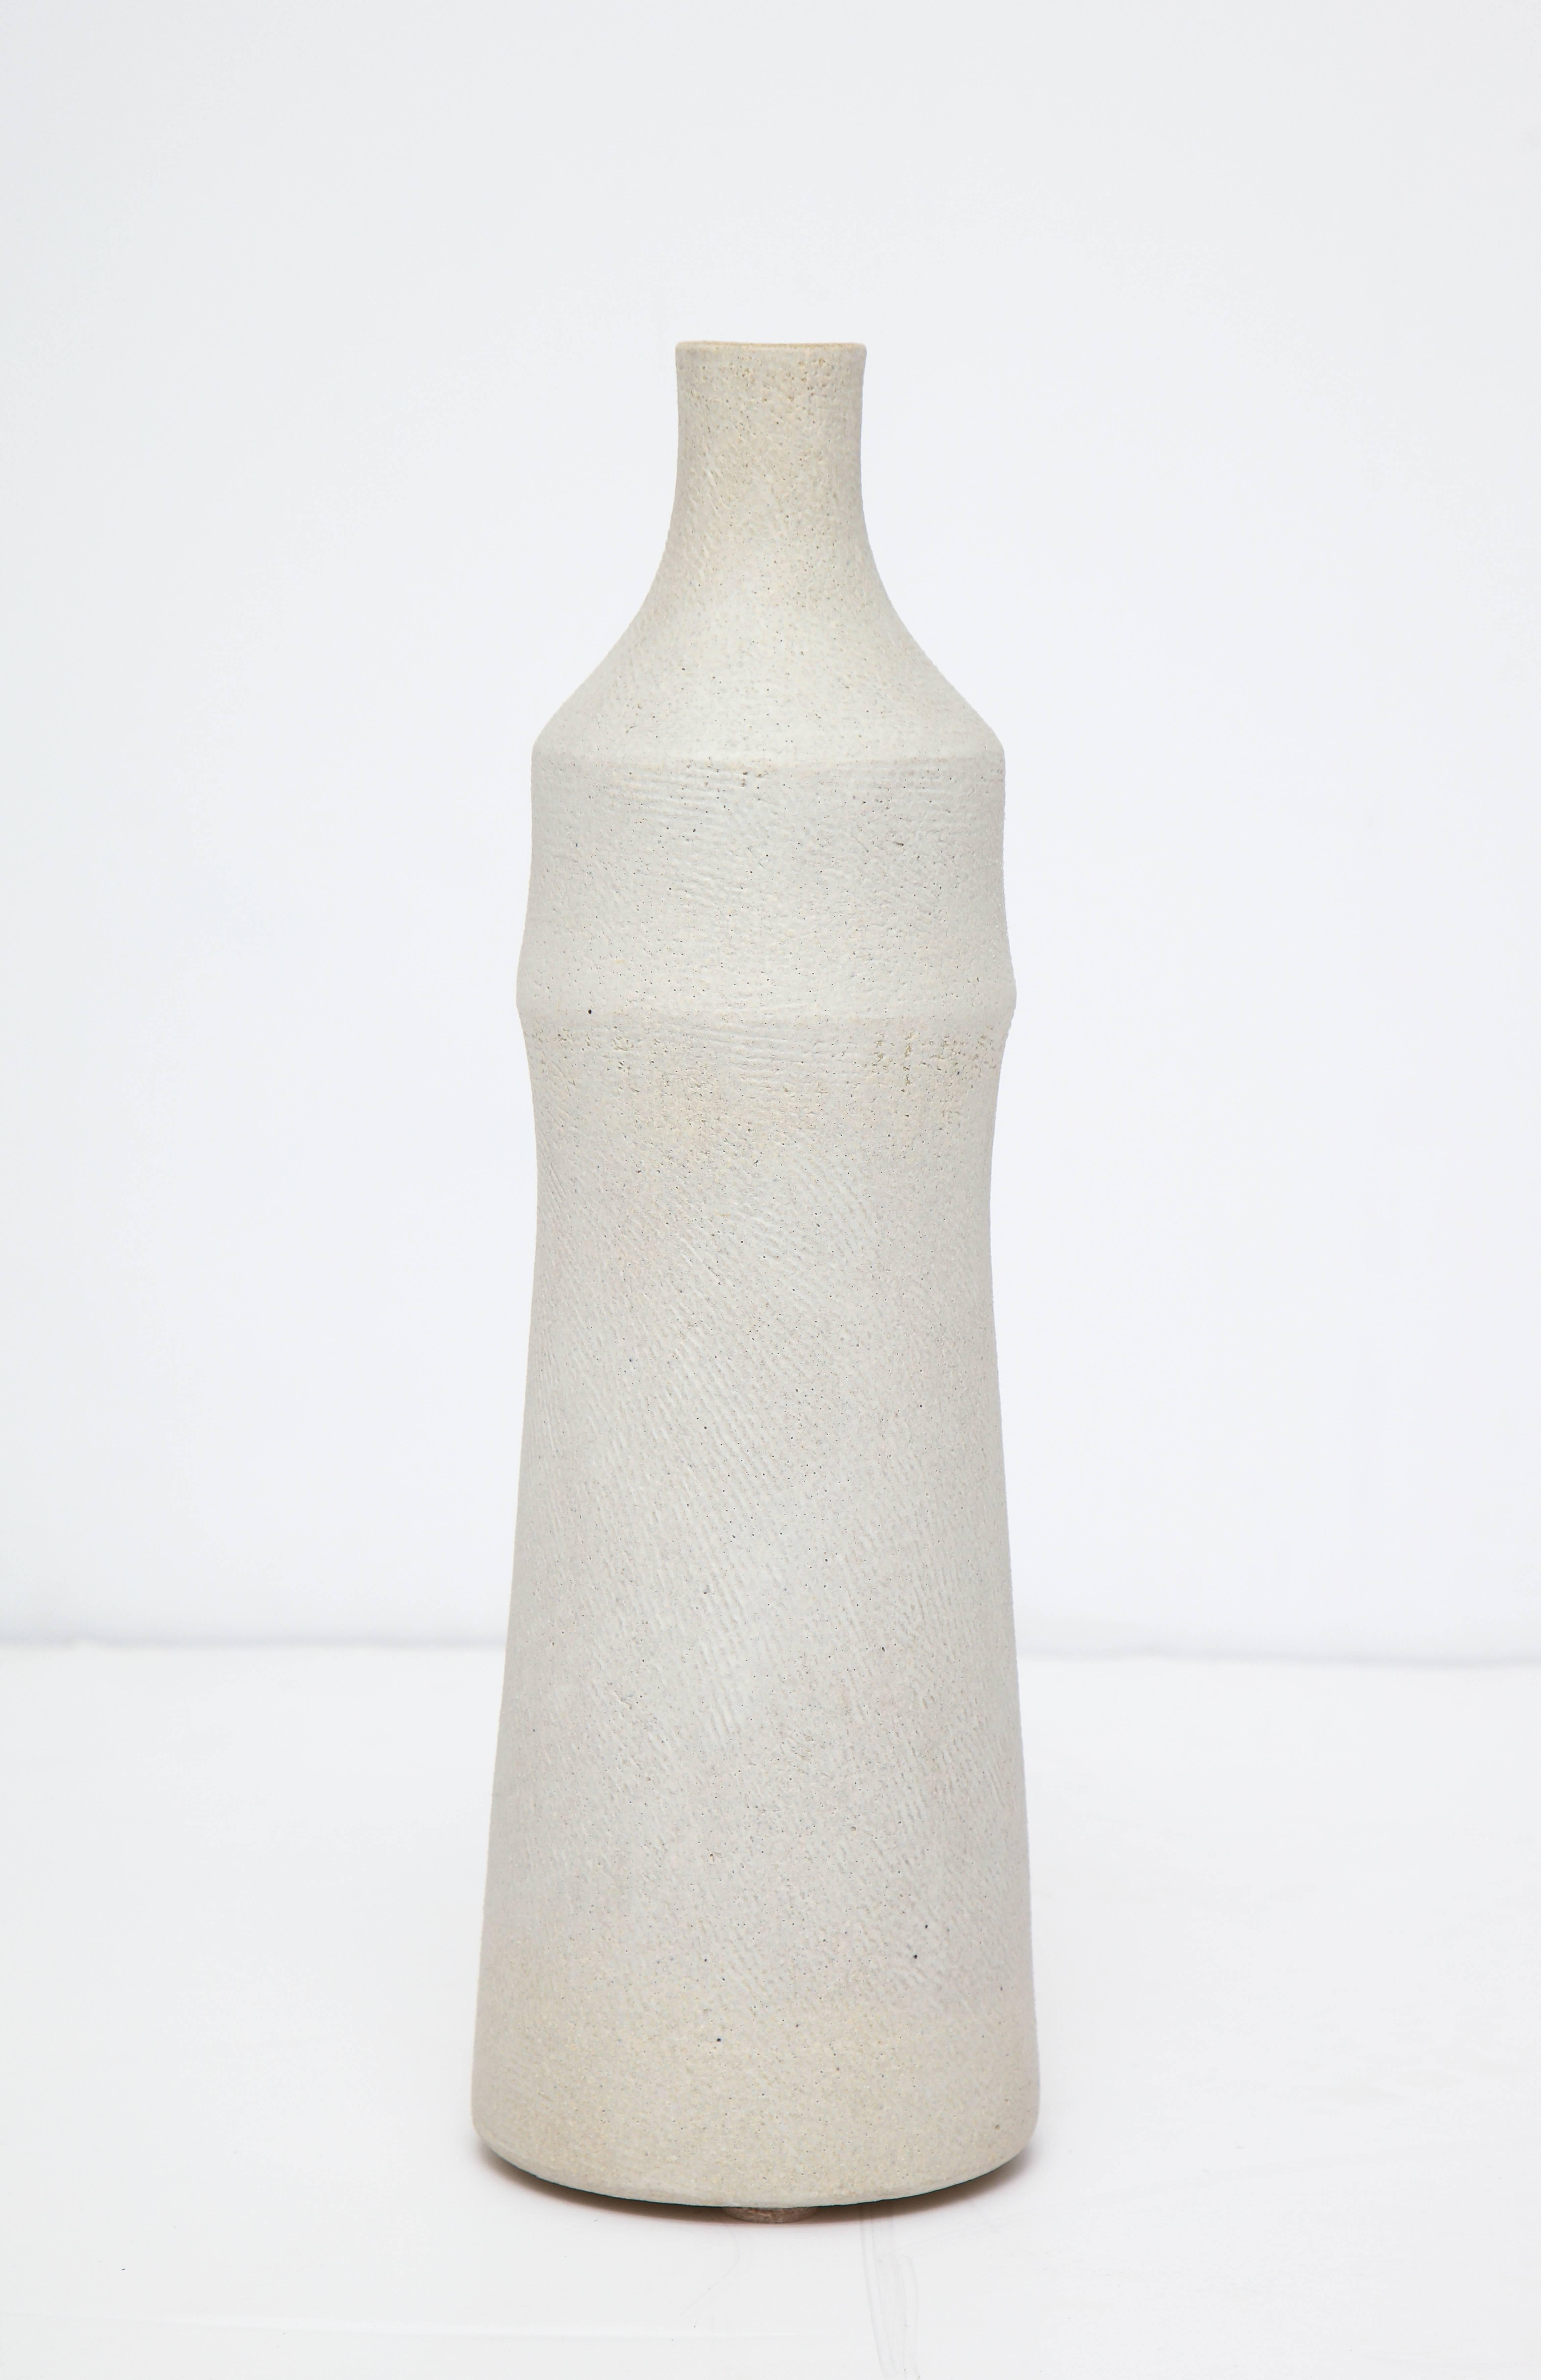 Vessel - Madrona
Stoneware vessel. Stands about 15